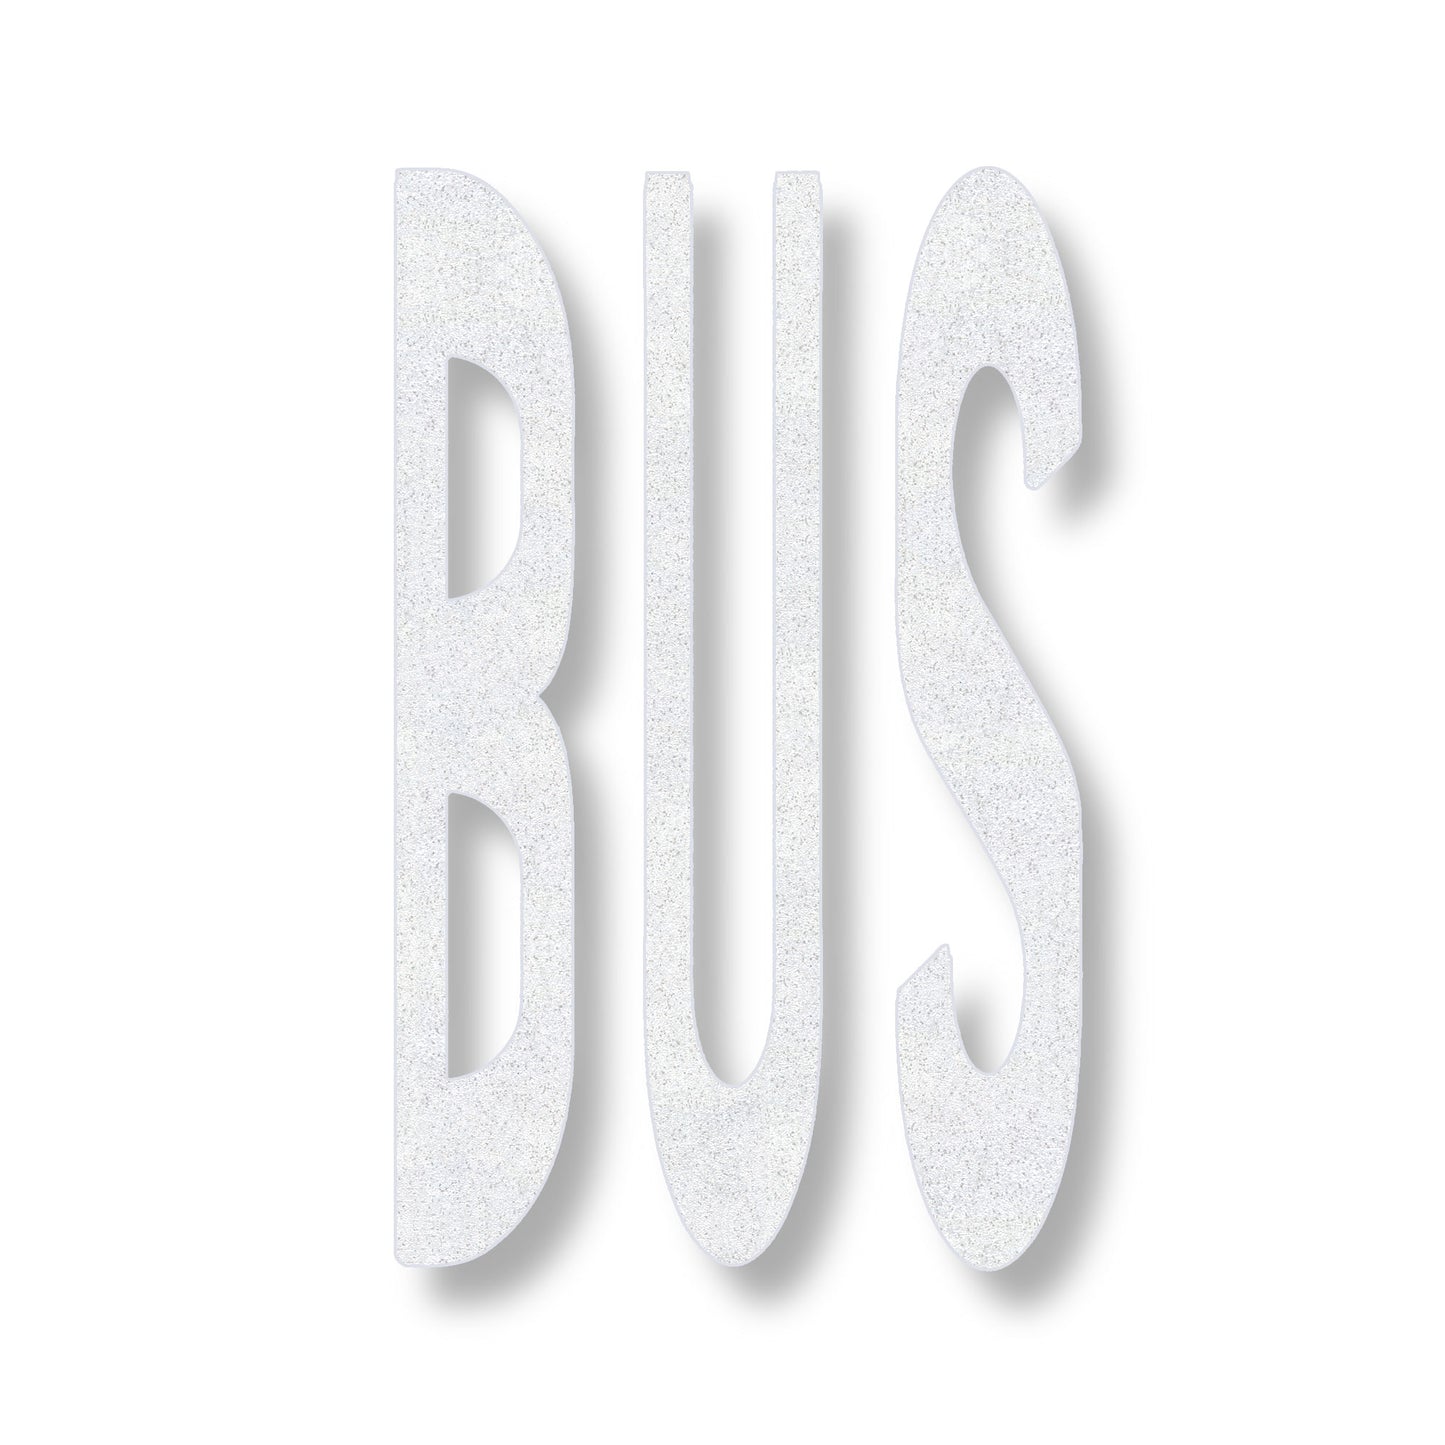 BUS in white in all capitals